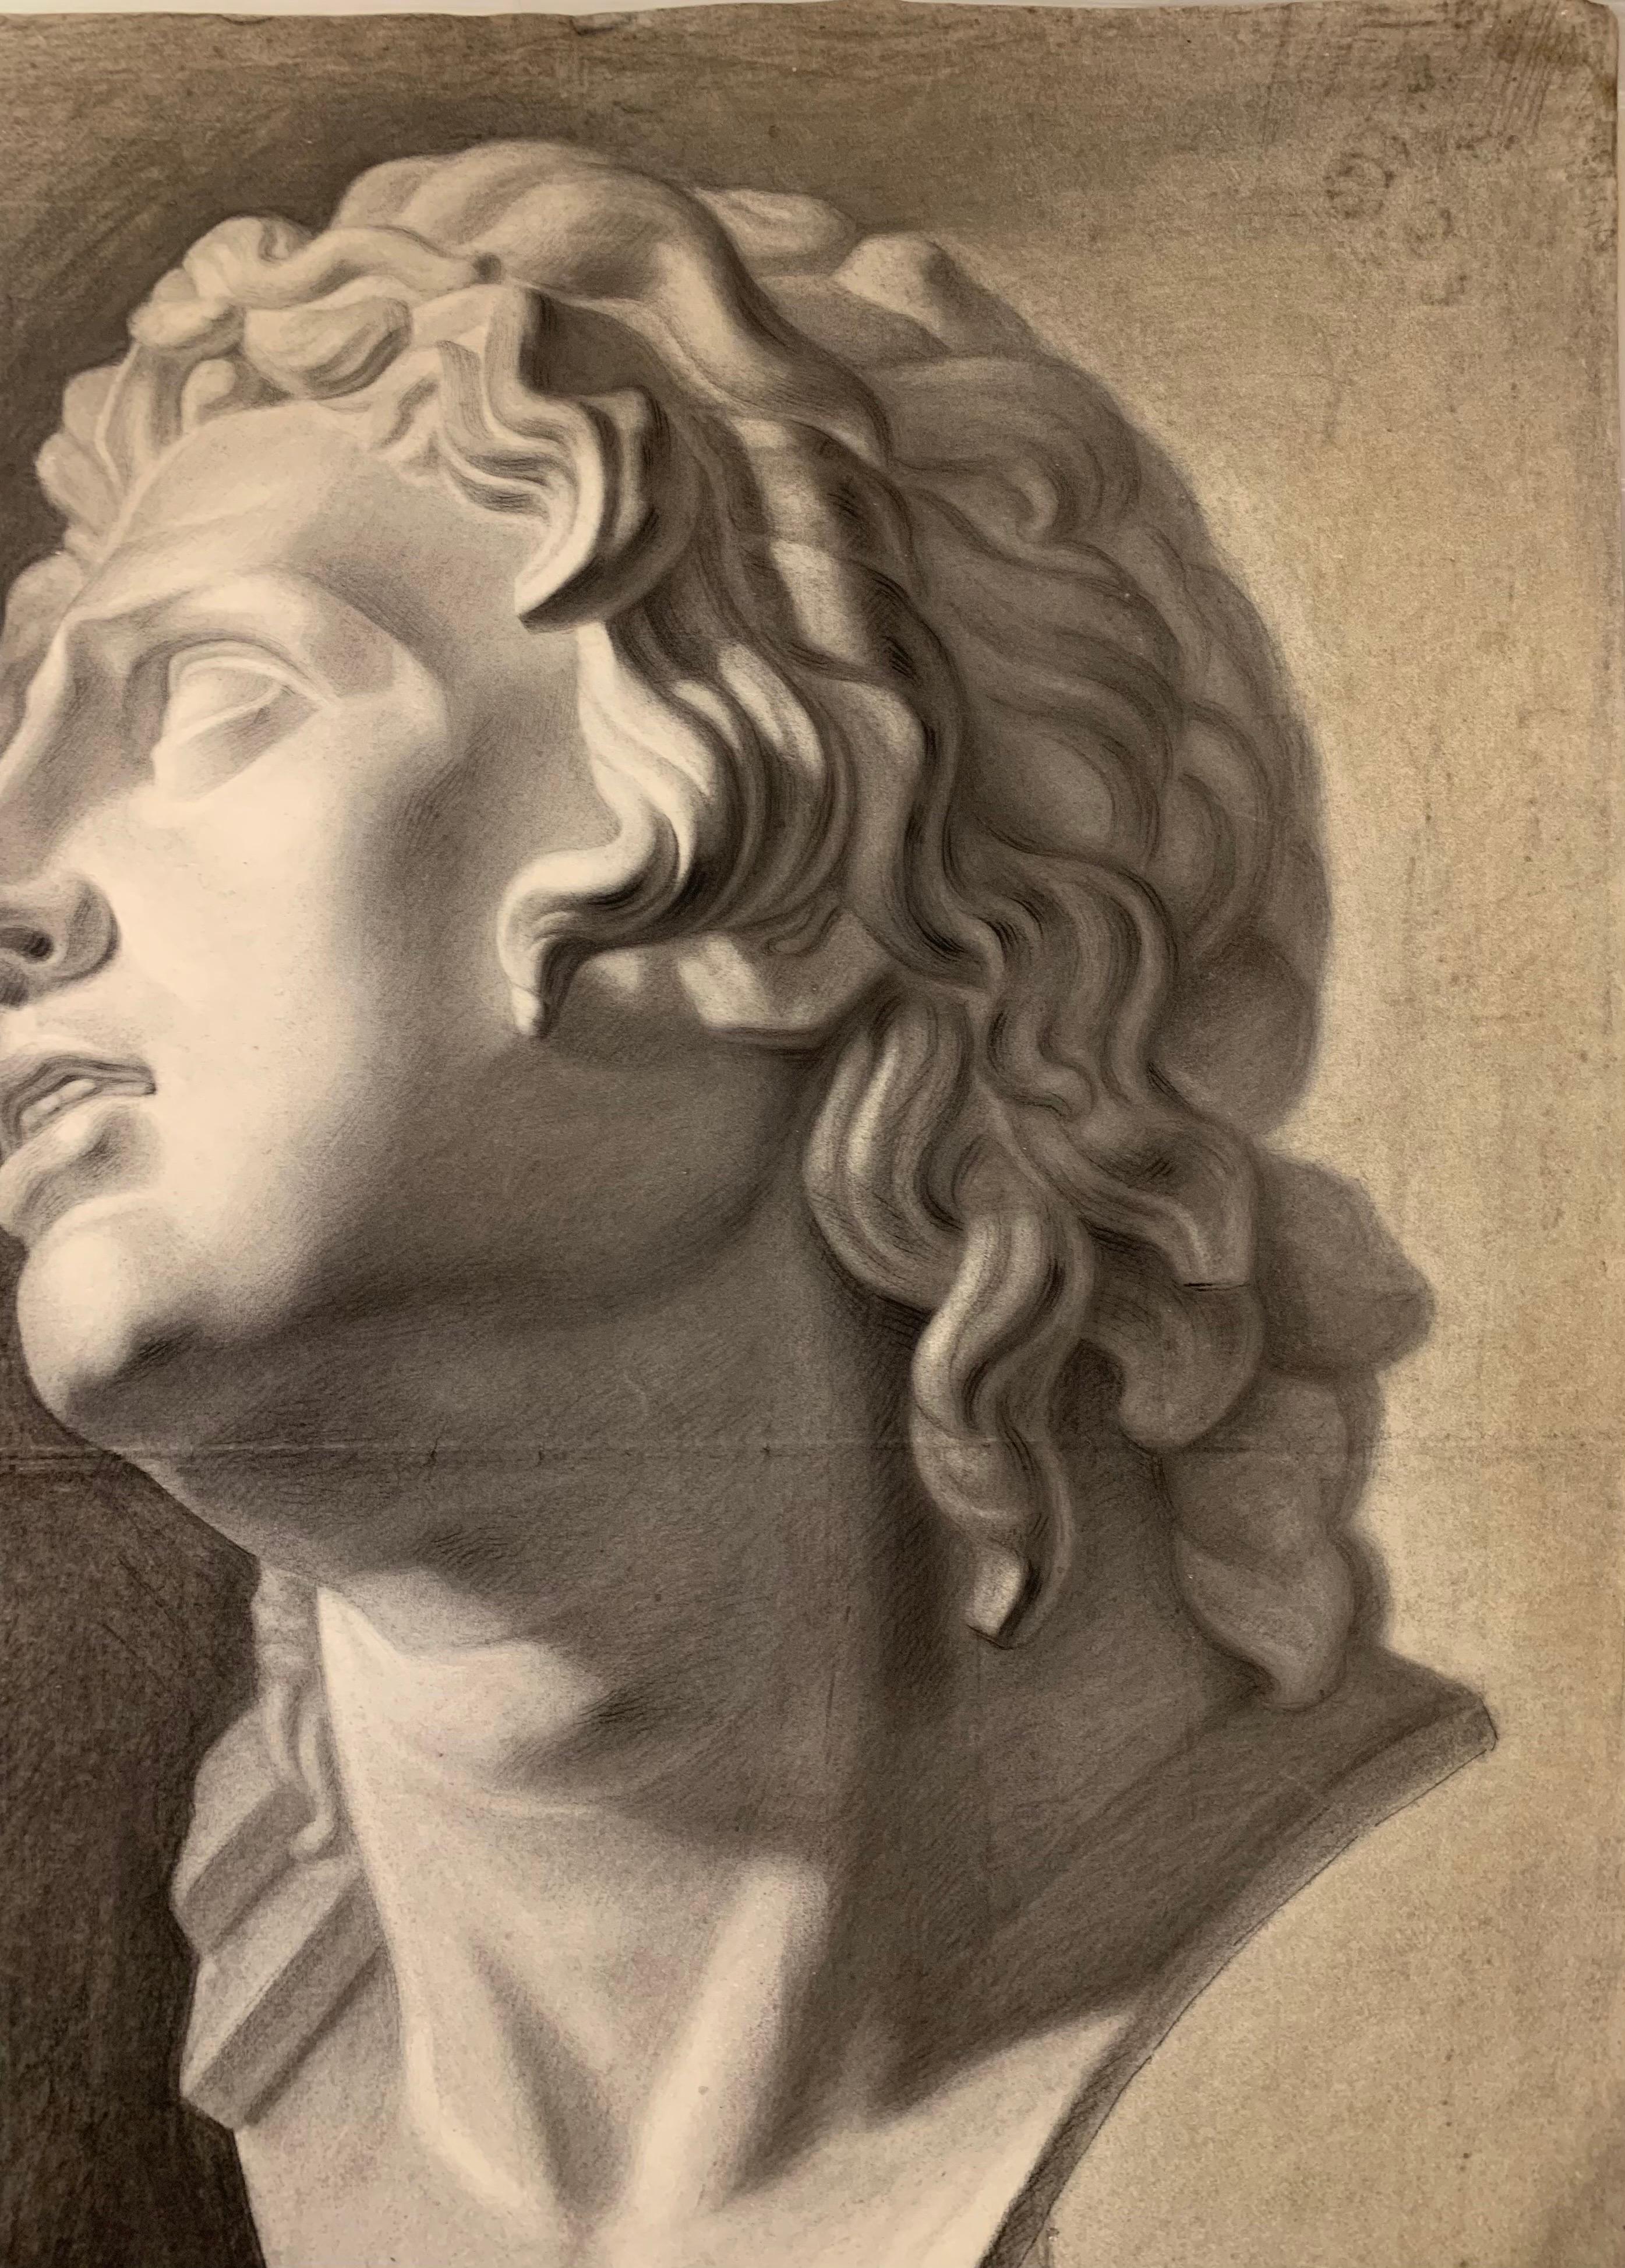 Large XIXth cent. Academic drawing of Alexander The Great’s bust from Uffizi.  11